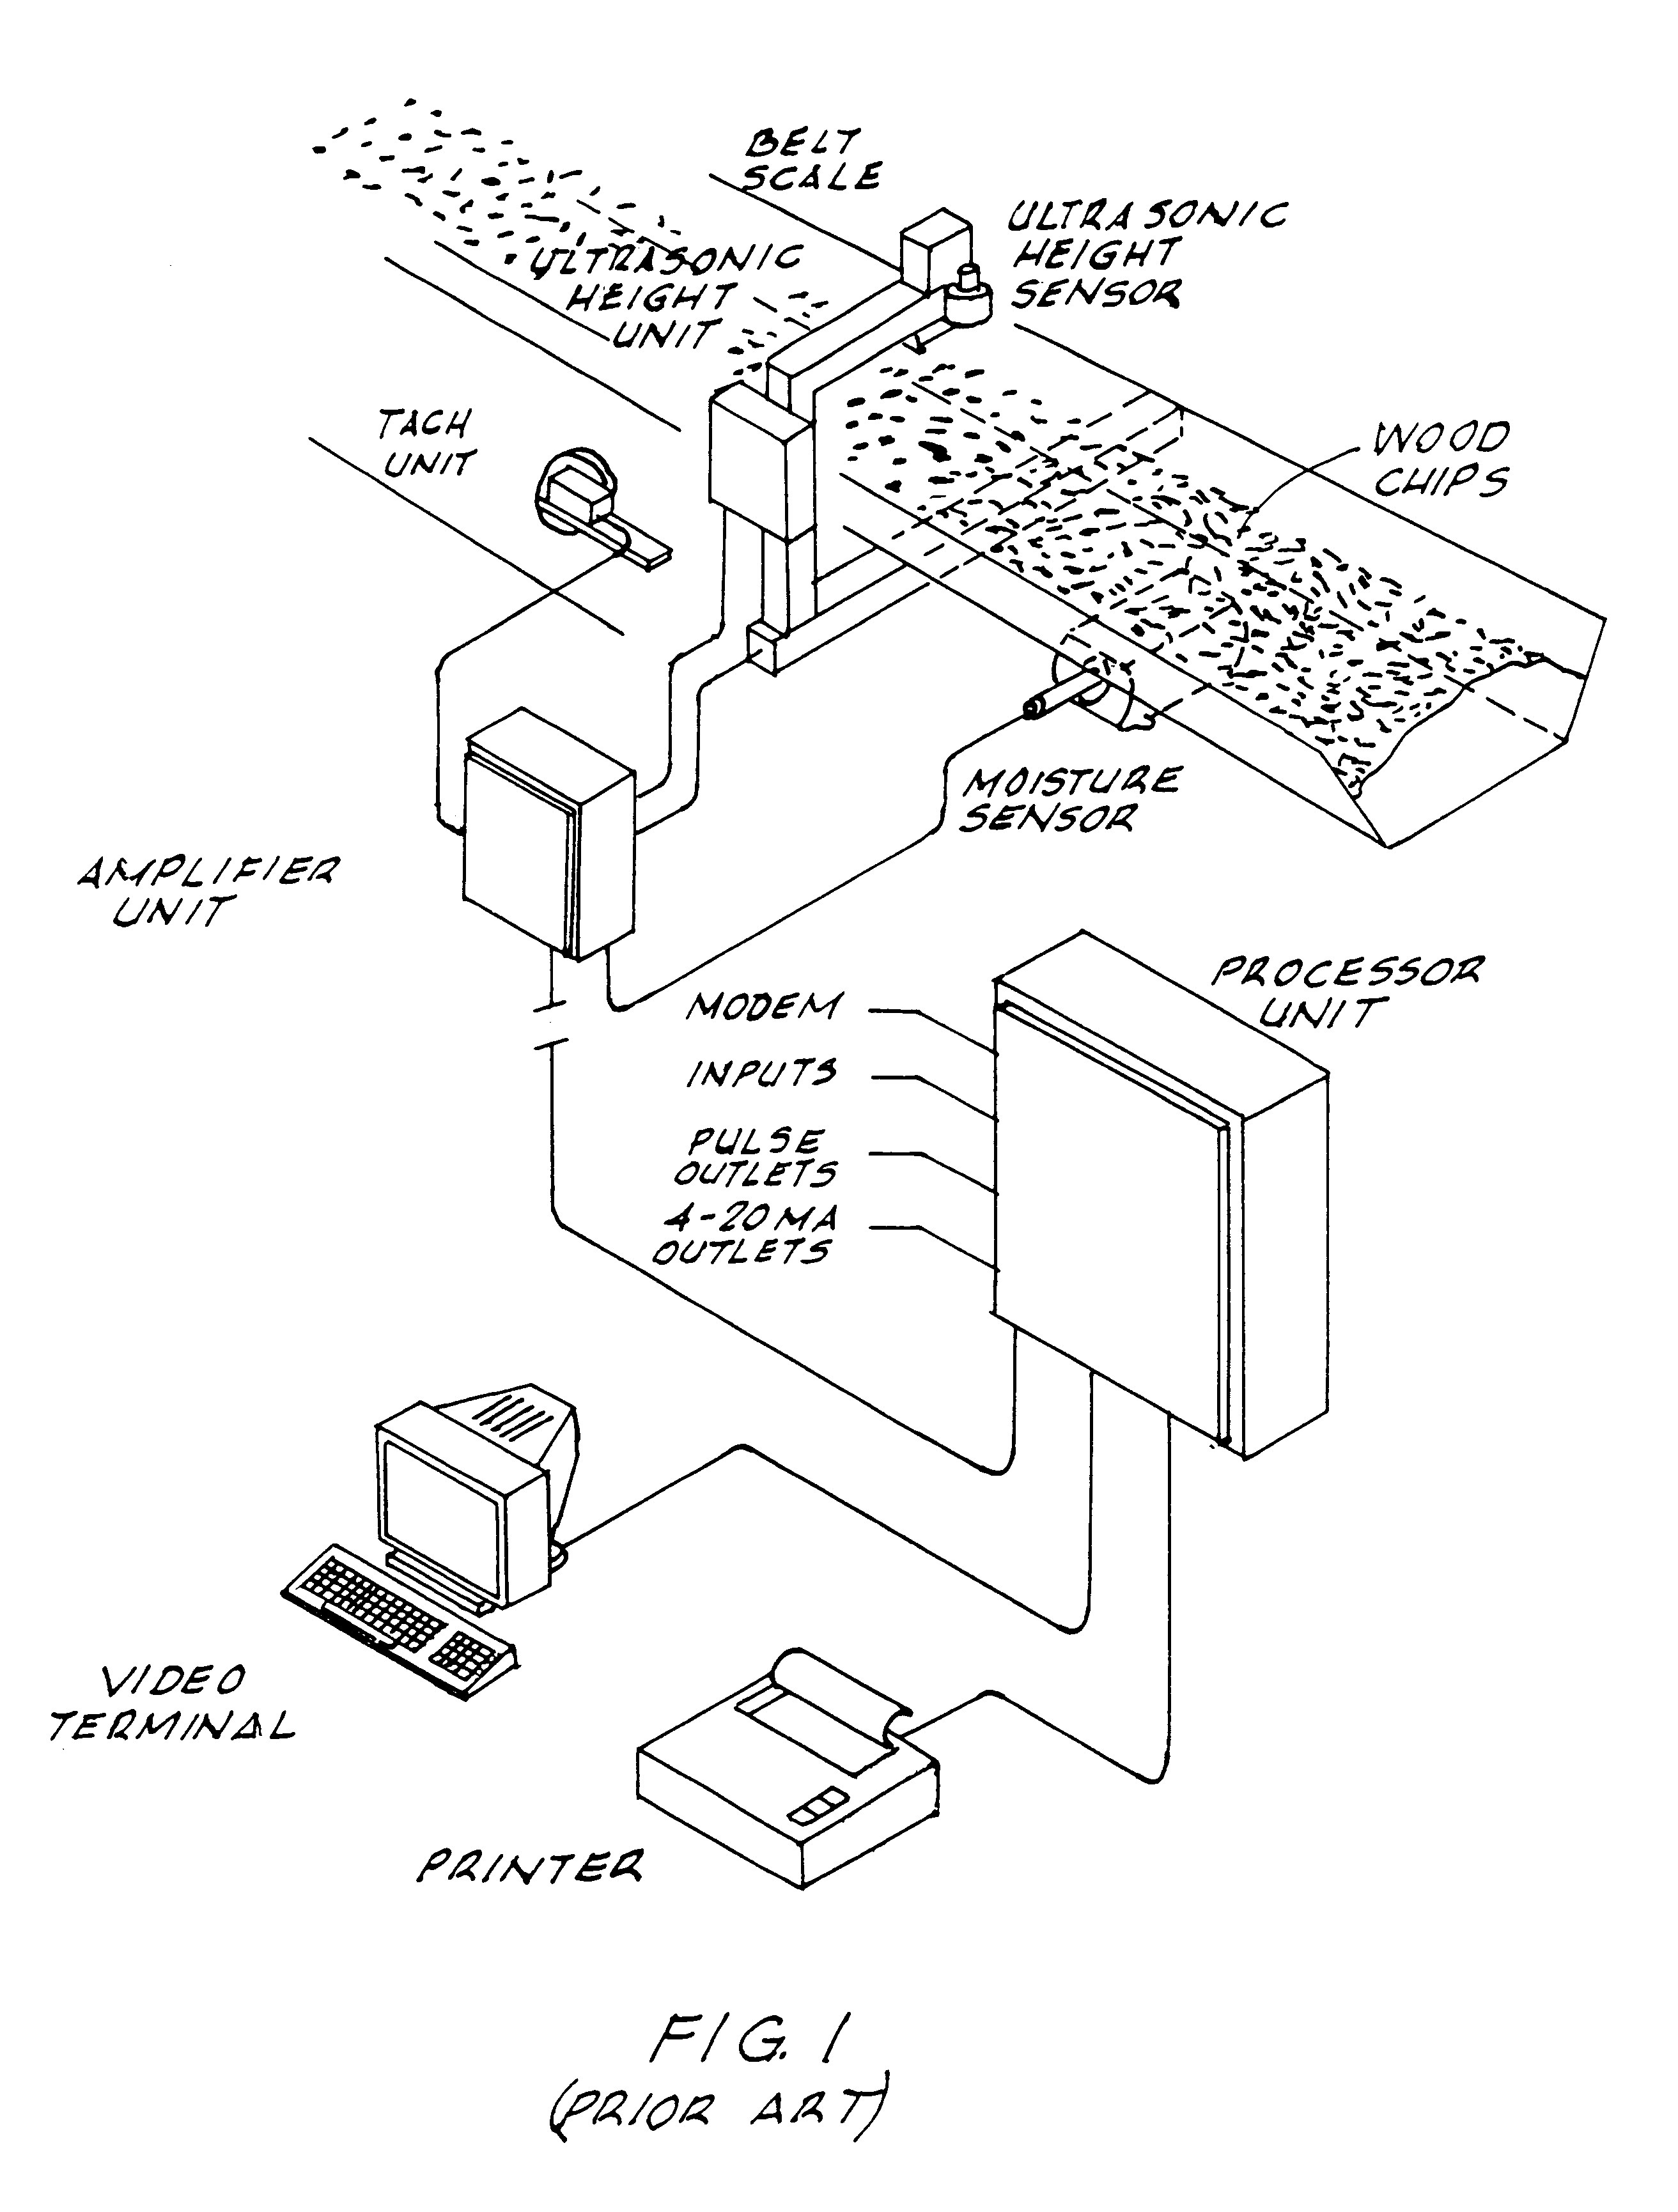 Height measurement apparatus for determining the volume/density of wood chips on a conveyor